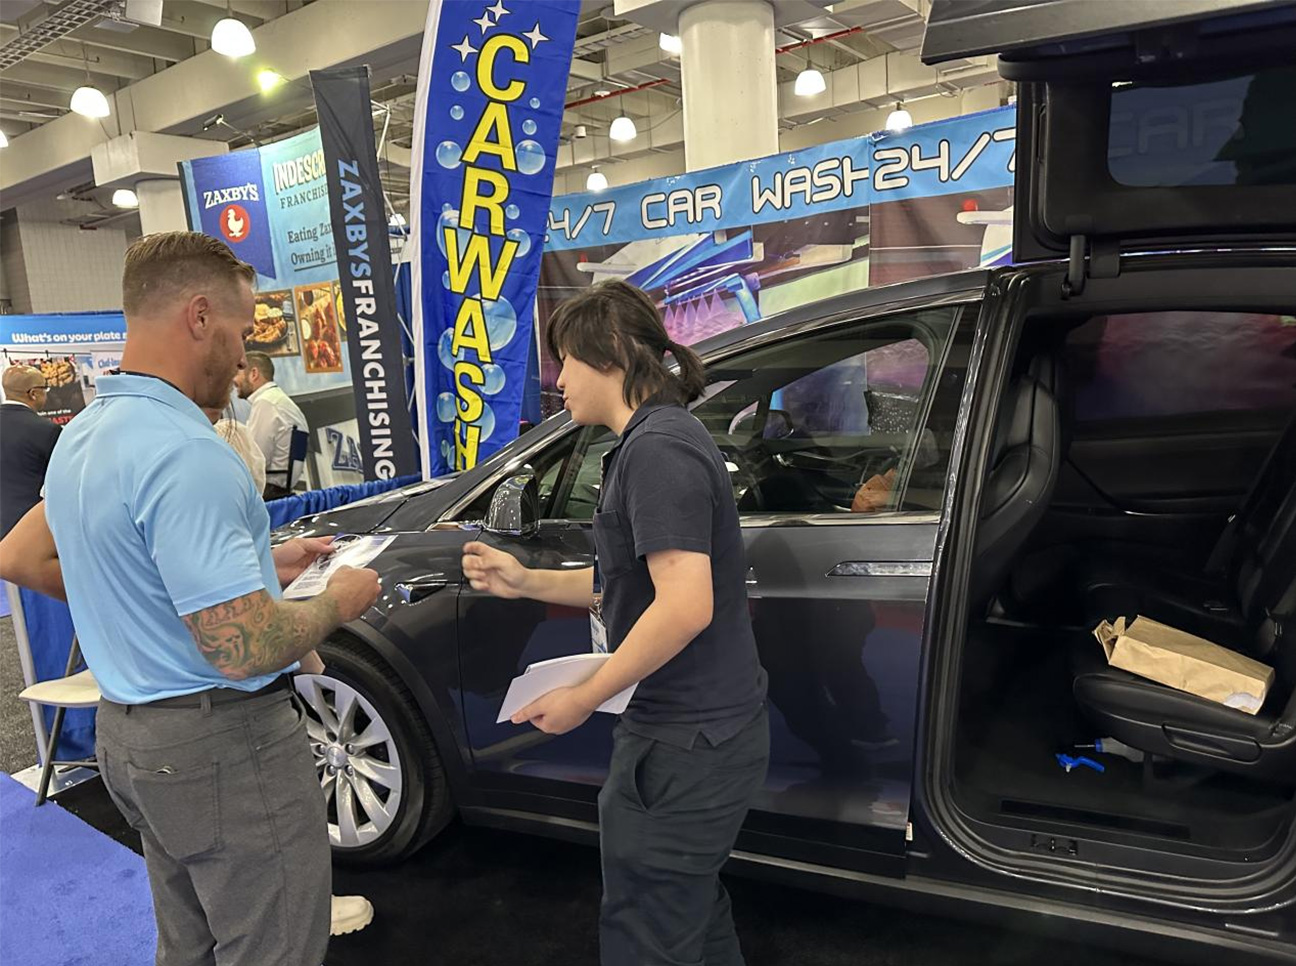 Welcome to visit CBK car wash show in New York